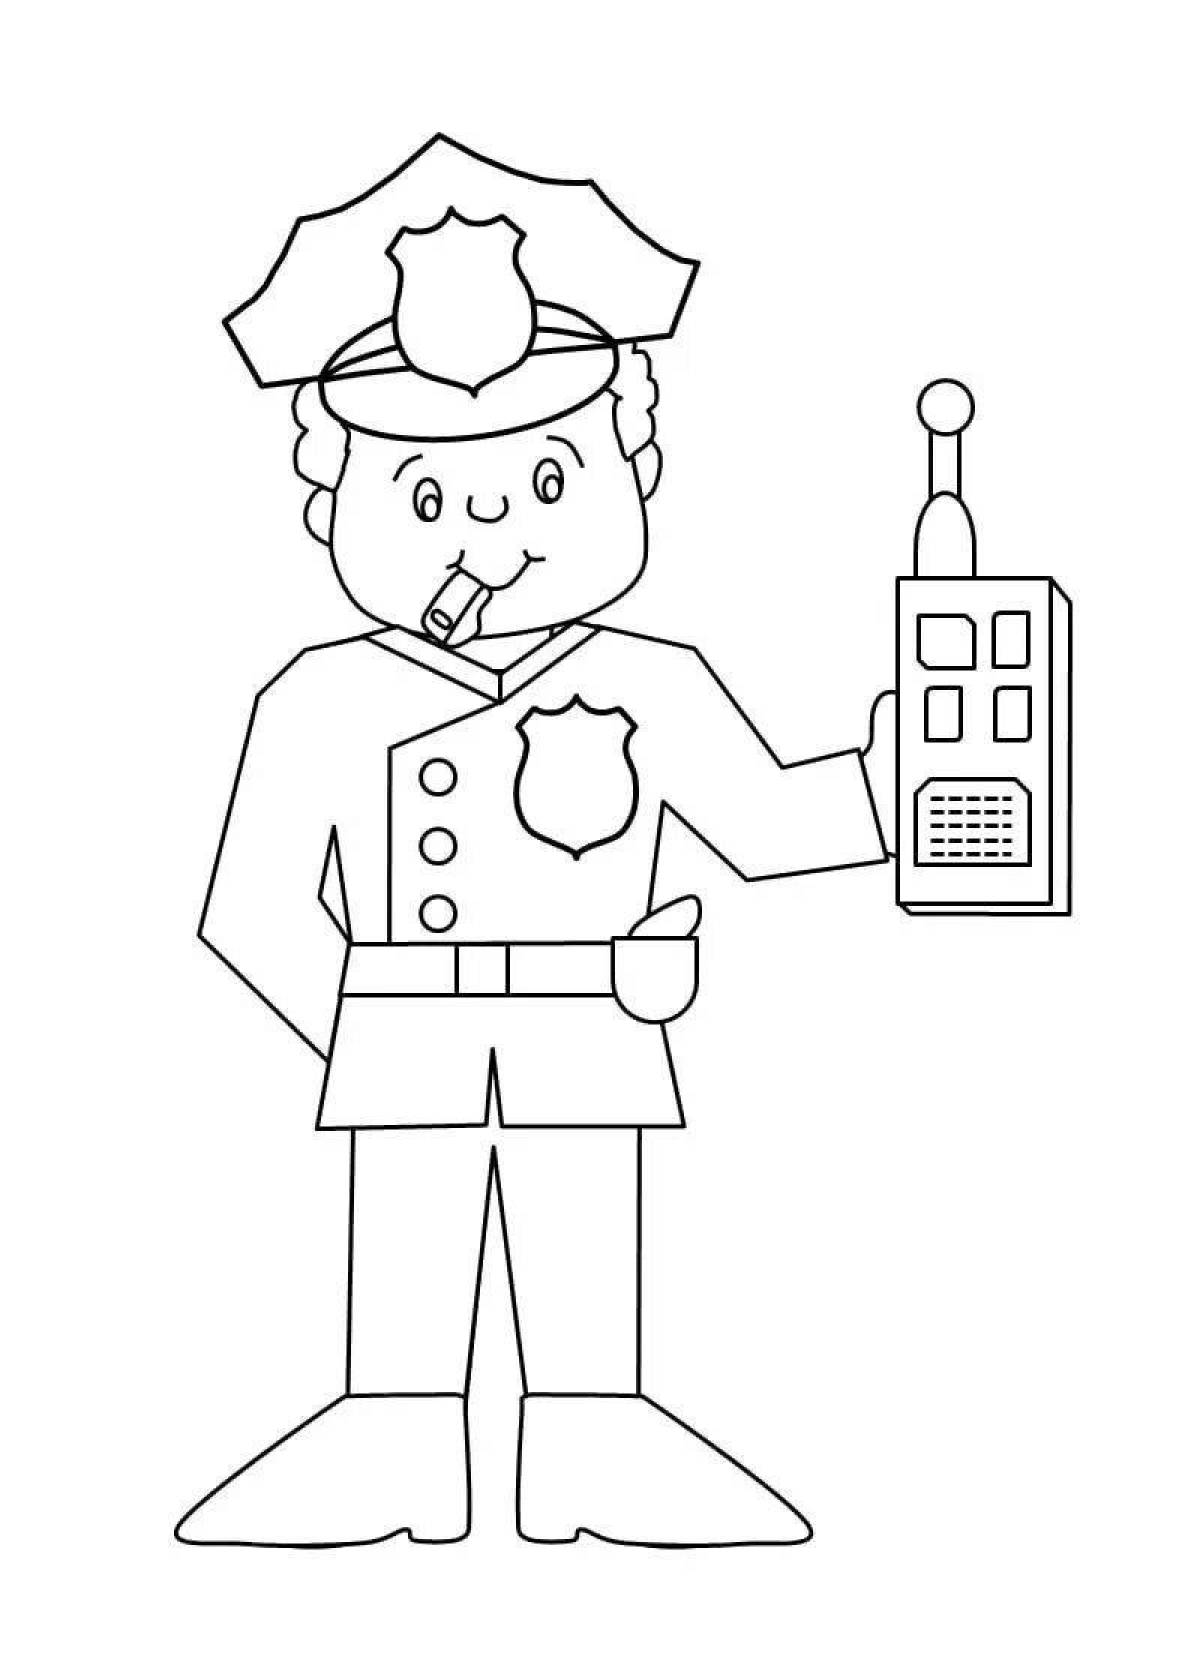 Exquisite 1st grade profession coloring pages